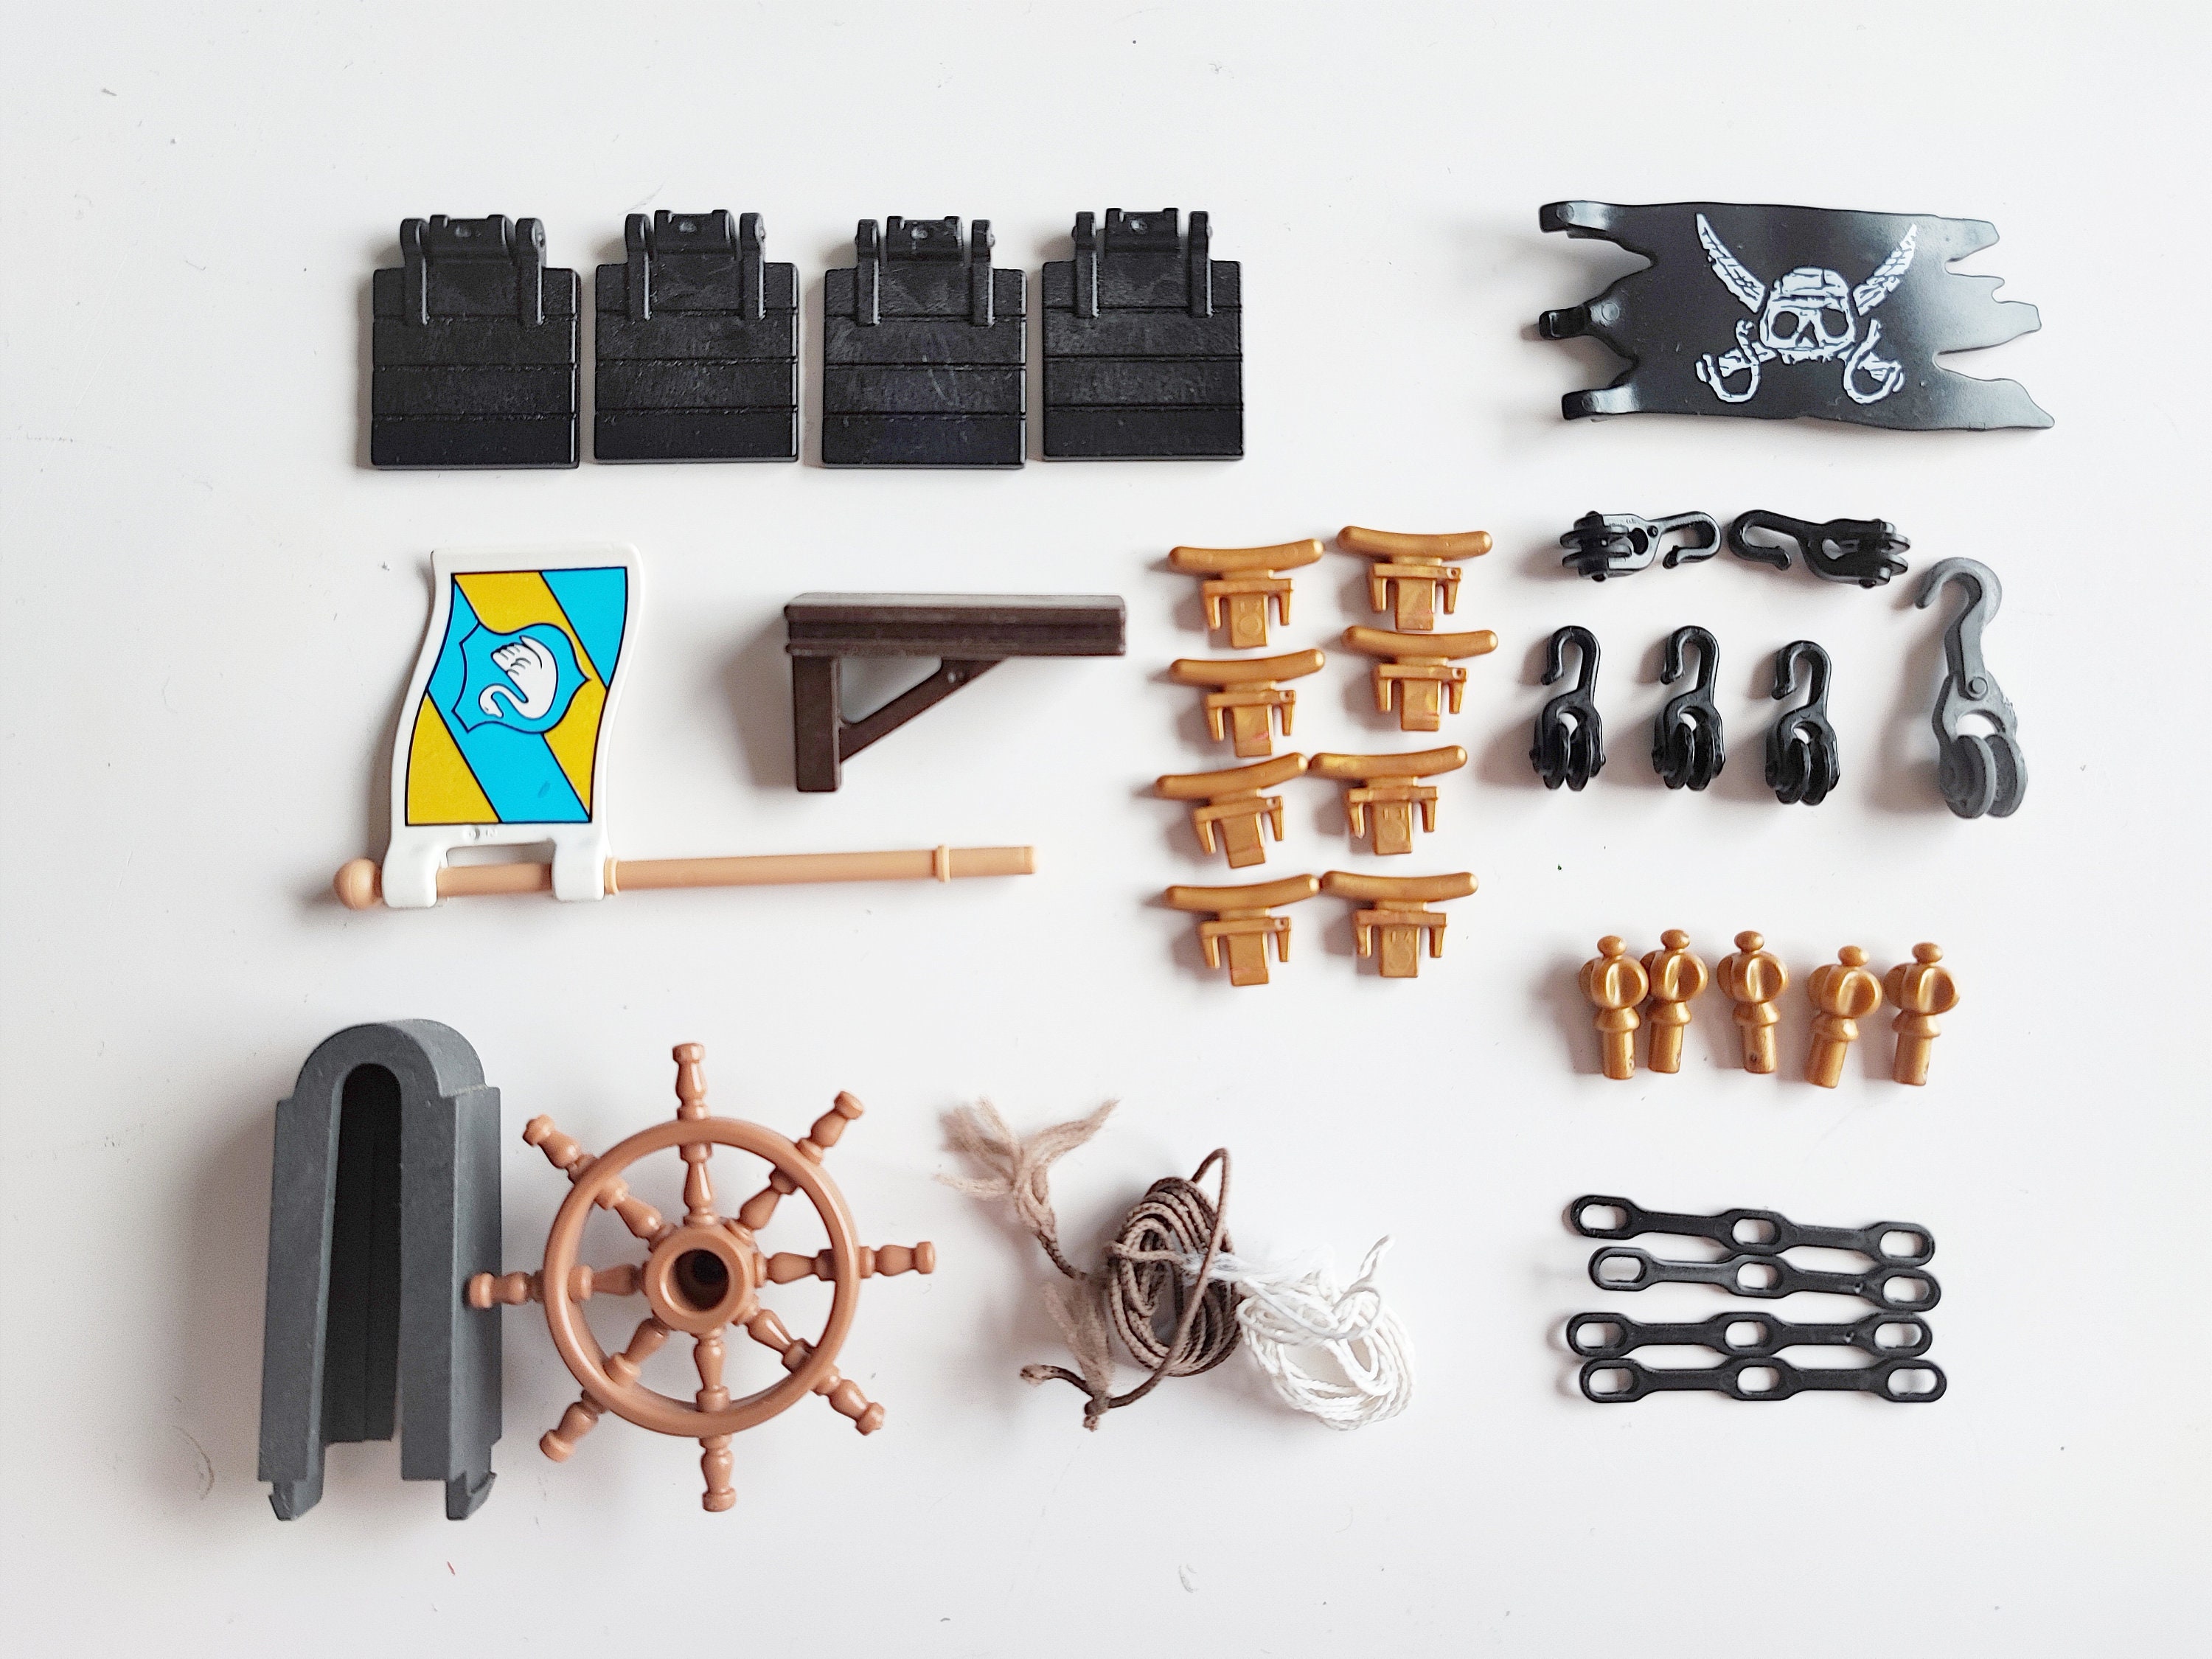 Pick-a-part for Pirate Ship 3940 Playmobil Spare Parts 2015 3053 3286 3550  3750 4290 5135 